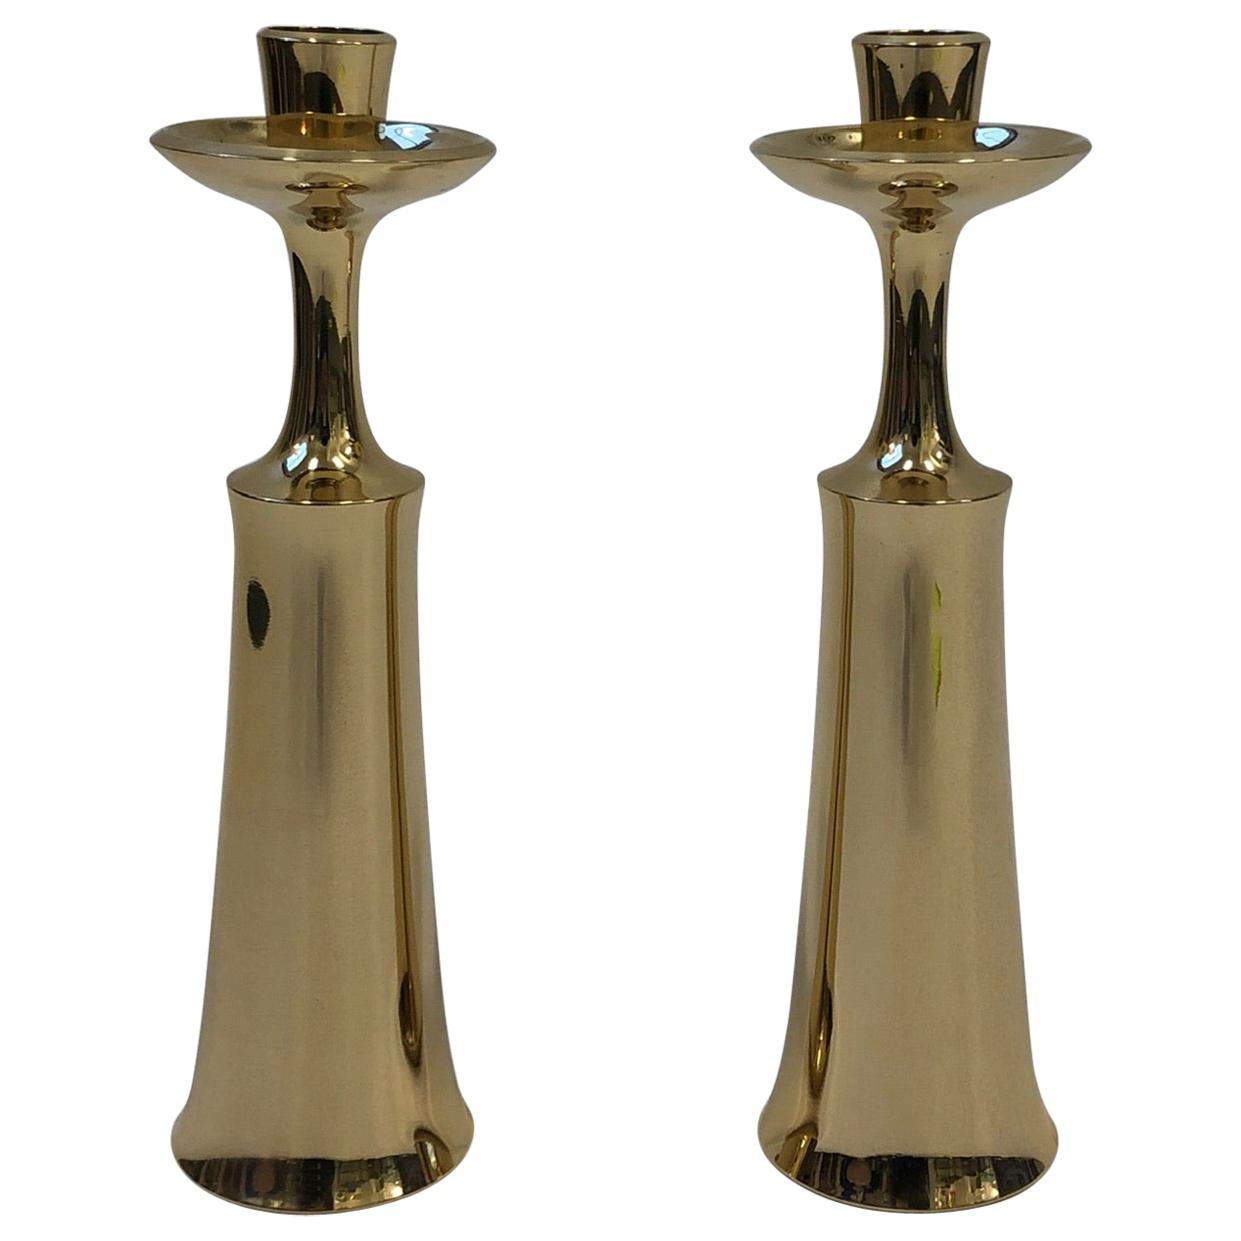 Pair of Polish Brass Candlesticks by Jens Quistgaard for Dansk